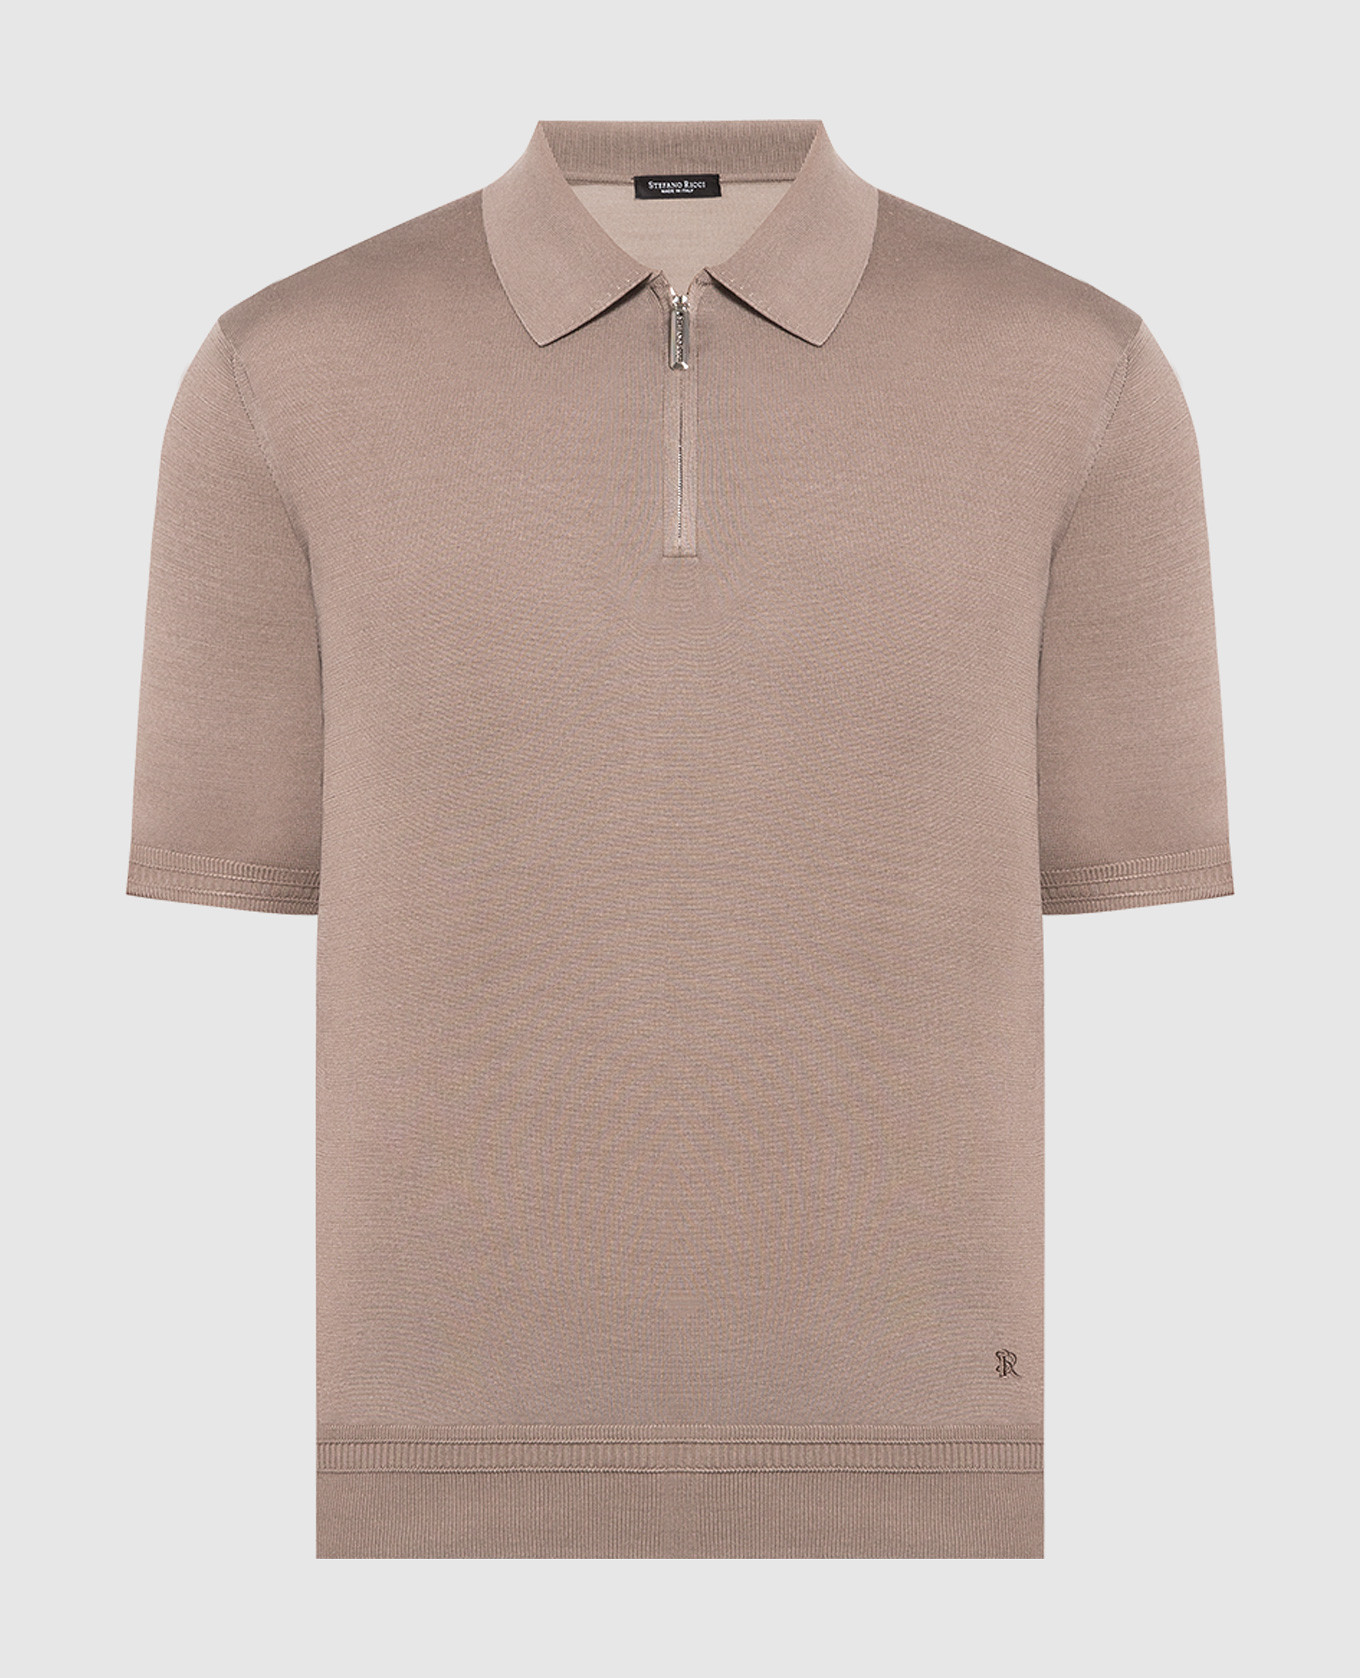 Brown silk polo with monogram logo embroidery